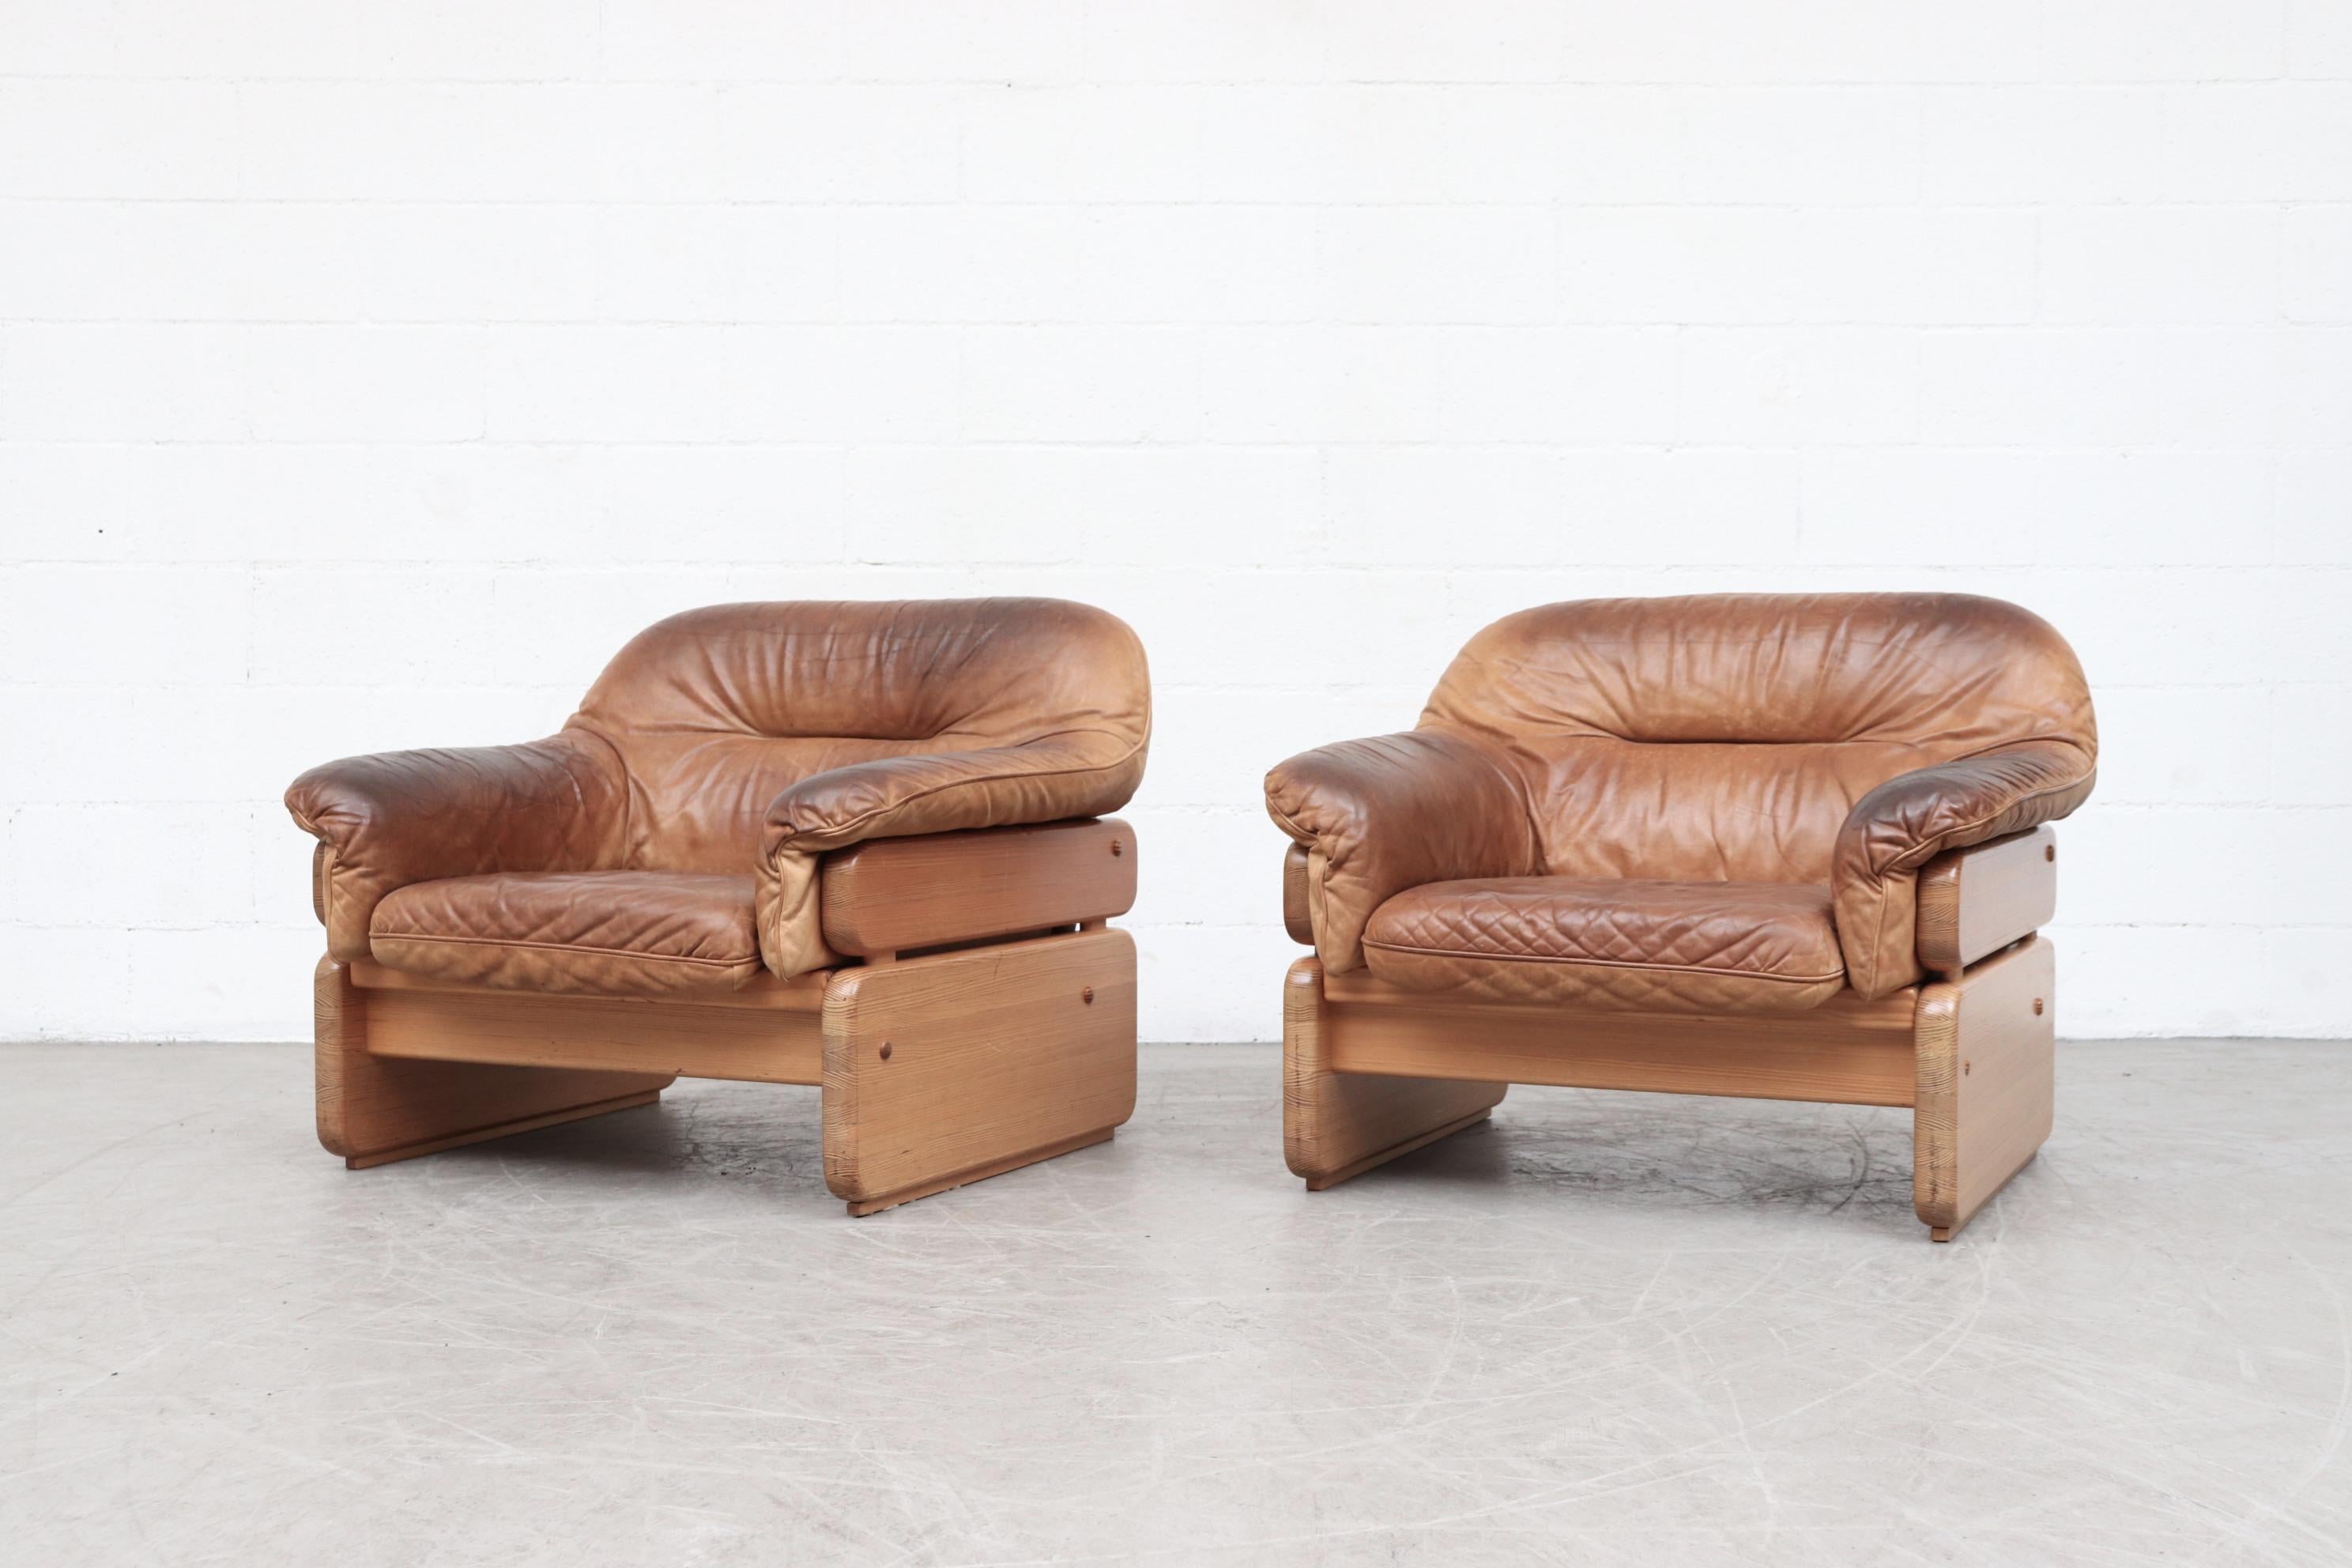 Handsome pair of pine and leather lounge chairs. Beautifully worn with a nice patina. In original condition with visible signs of wear consistent with age and use. Set price. Color may vary from photo.